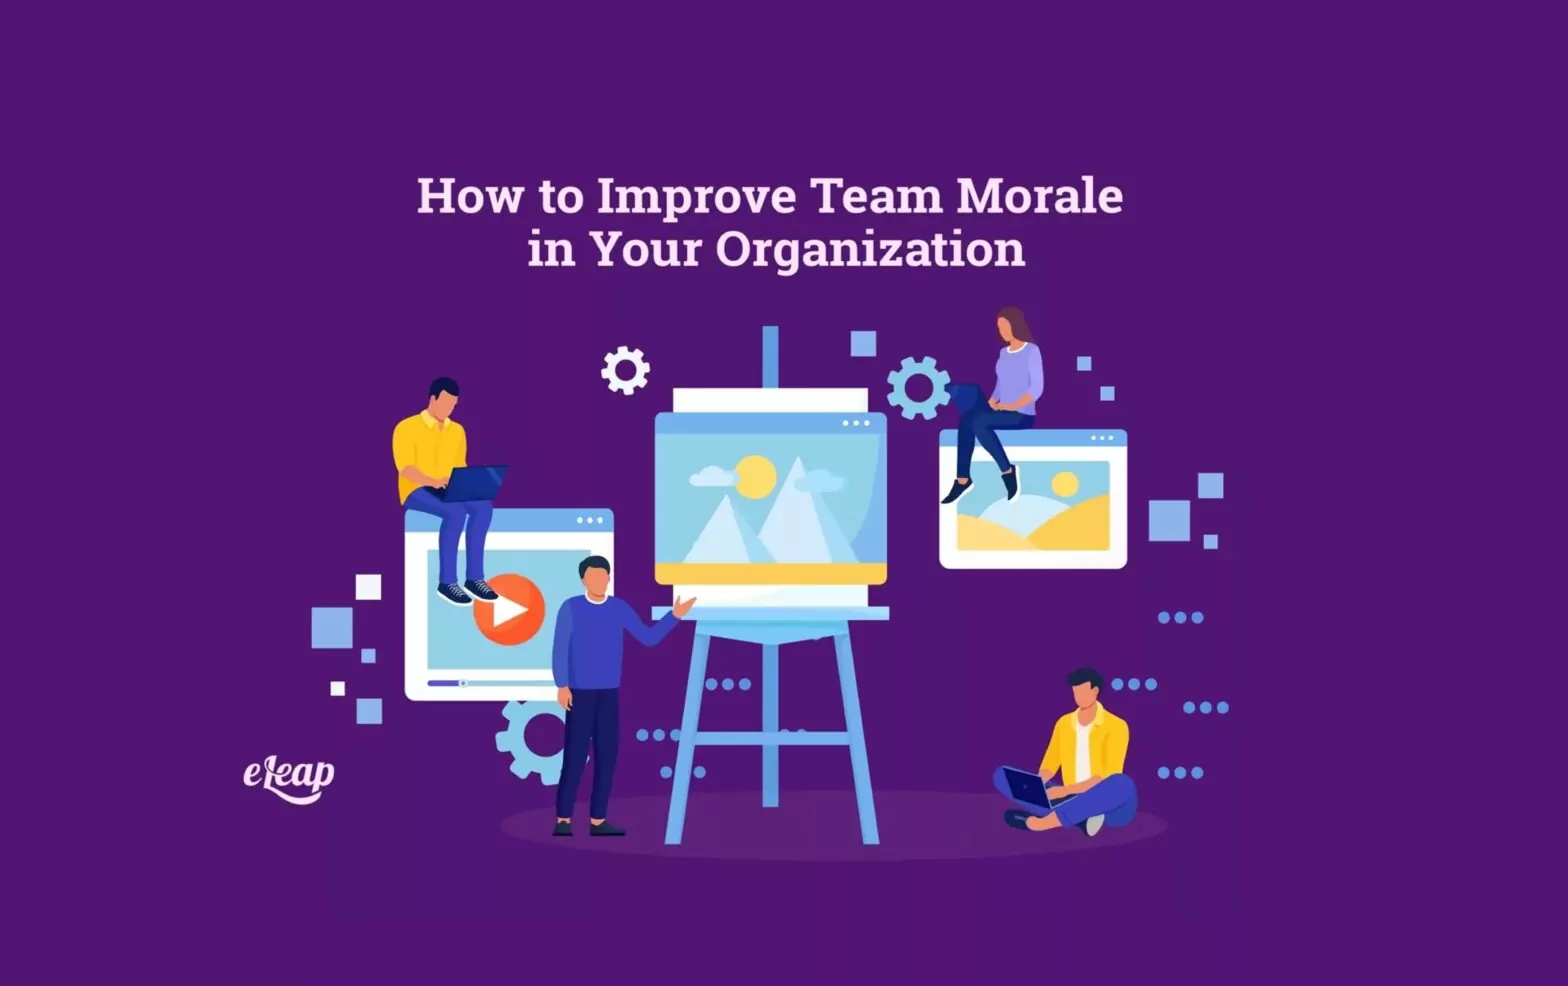 How to Improve Team Morale in Your Organization